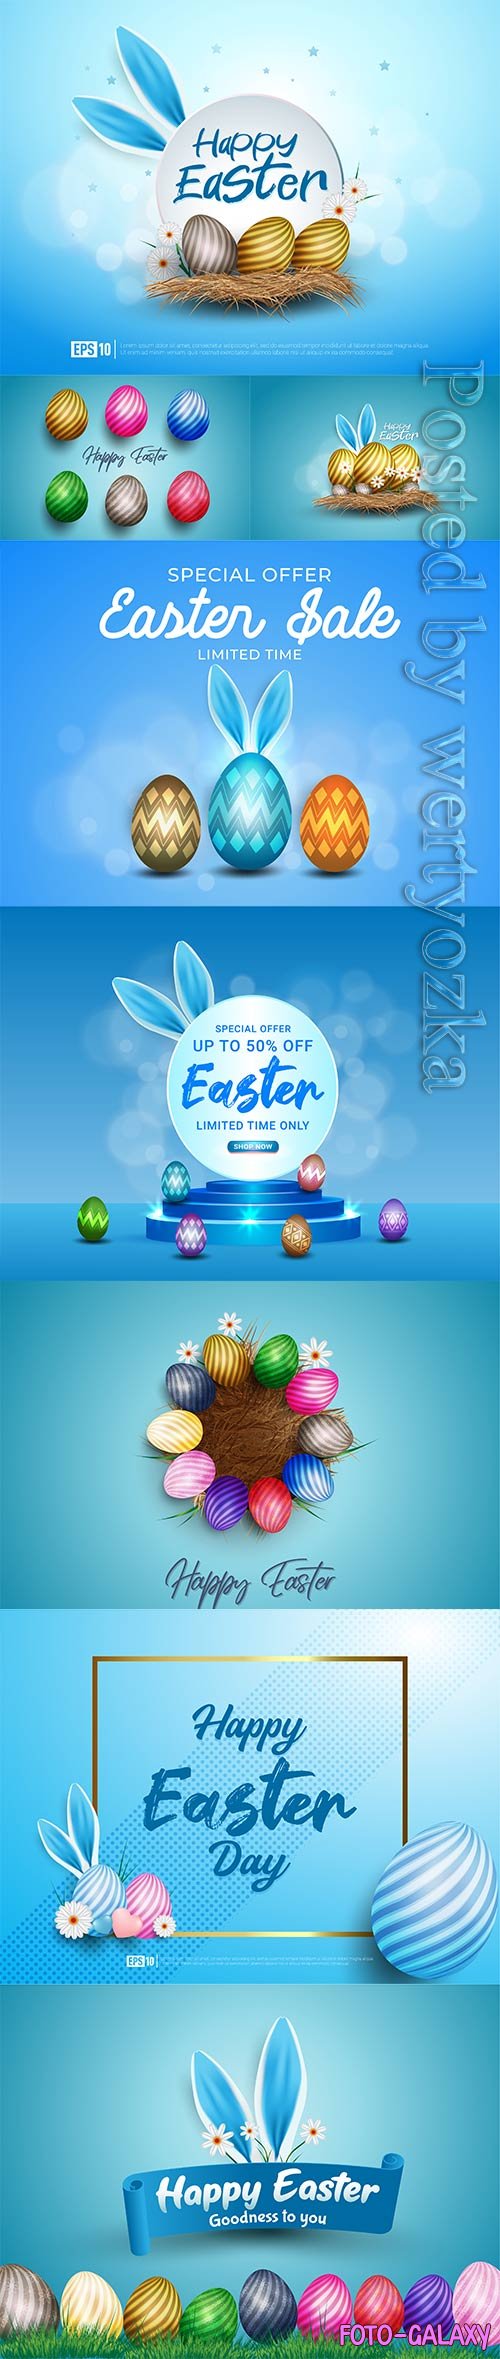 Happy easter background realistic decorated bunny ears and easter eggs